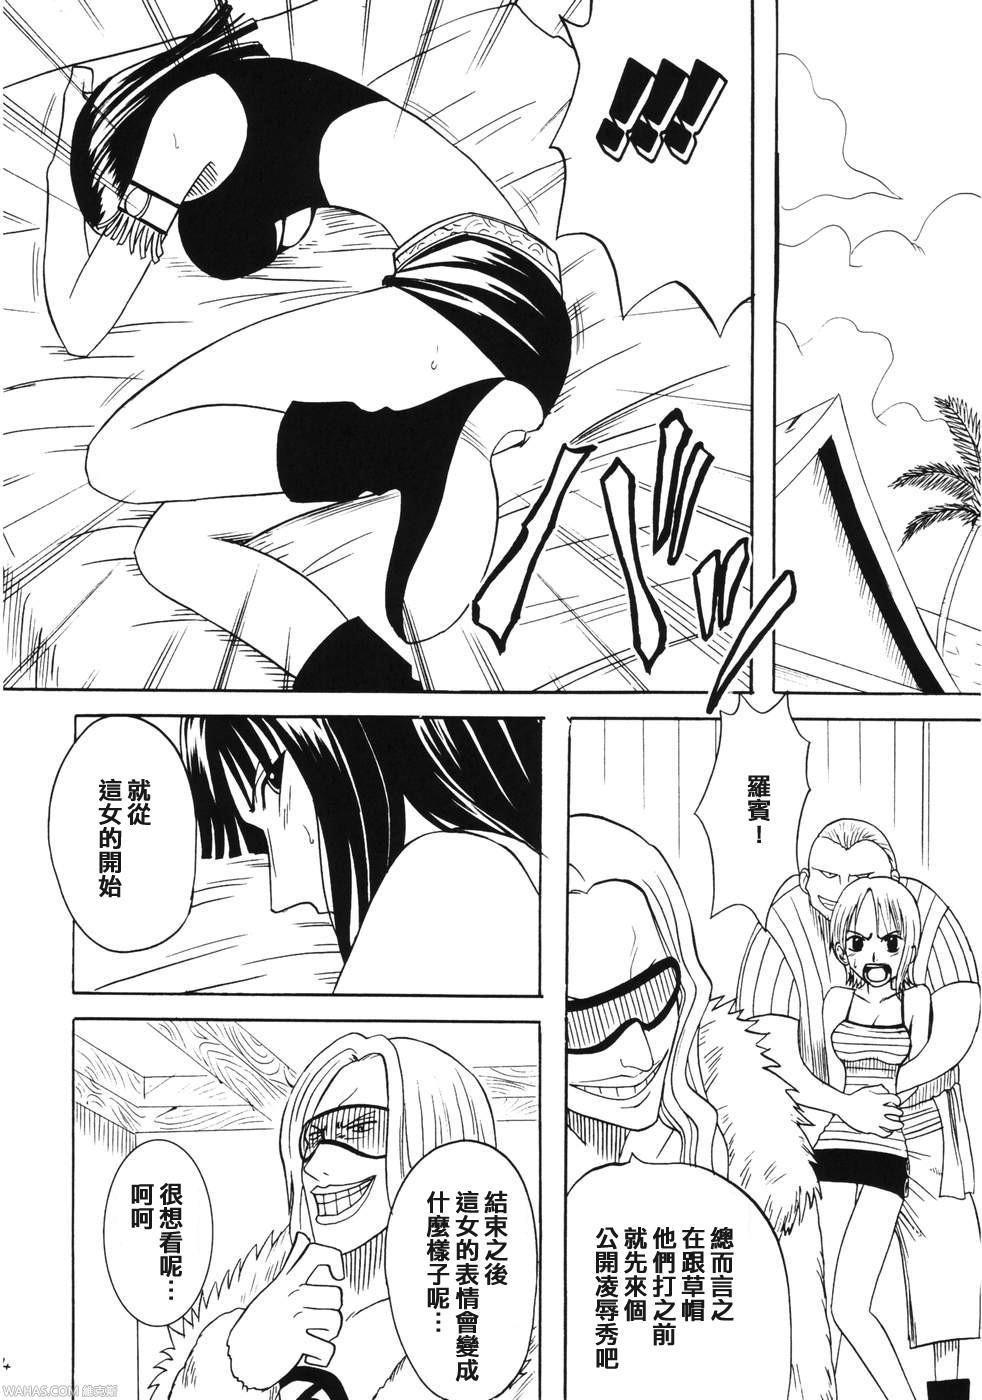 Striptease Dancing Animation Run - One piece Body - Page 13